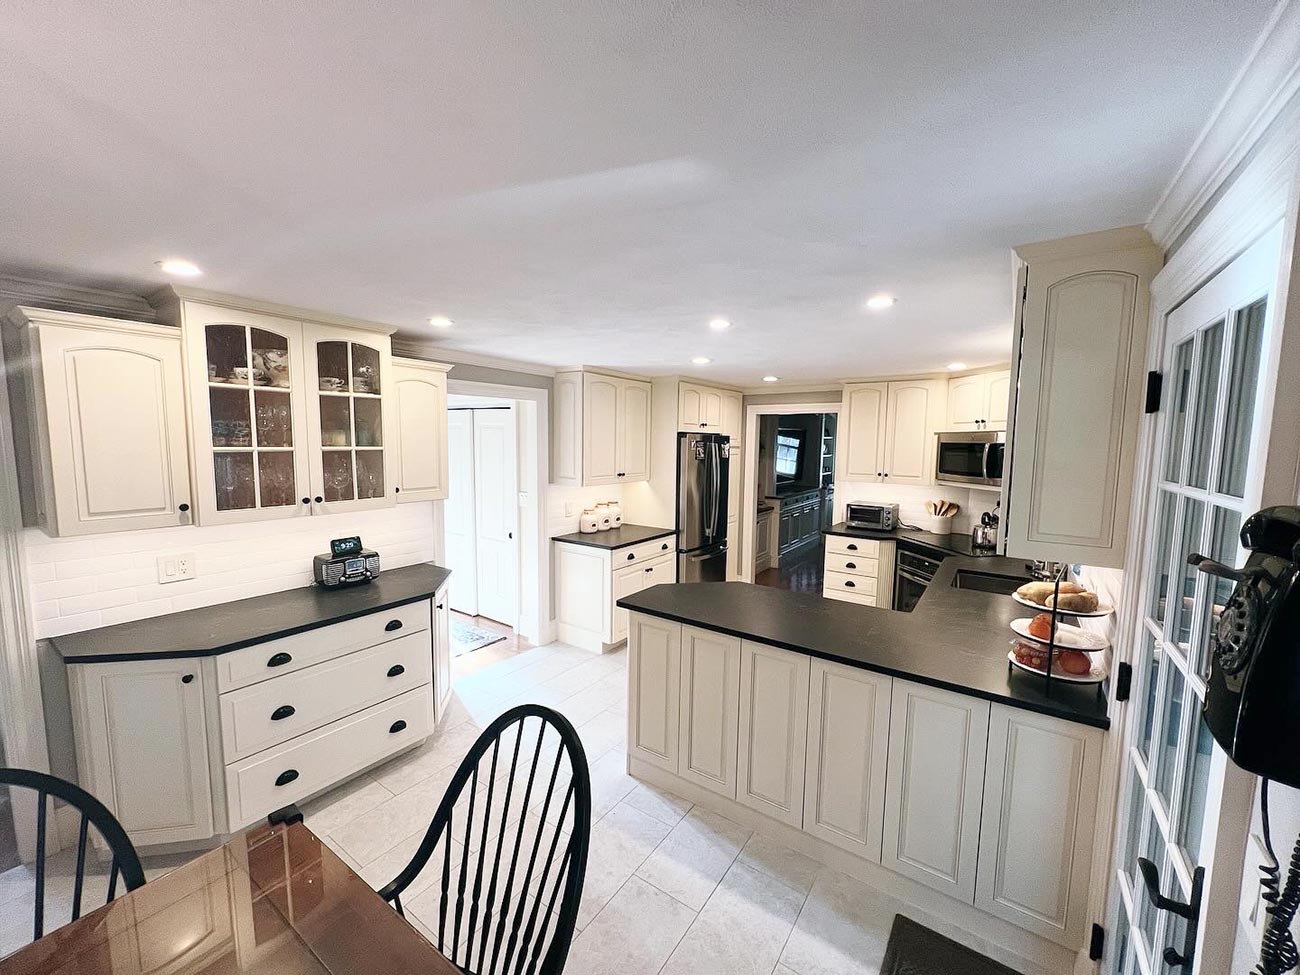 an after picture of kitchen renovation in Reading Massachusetts